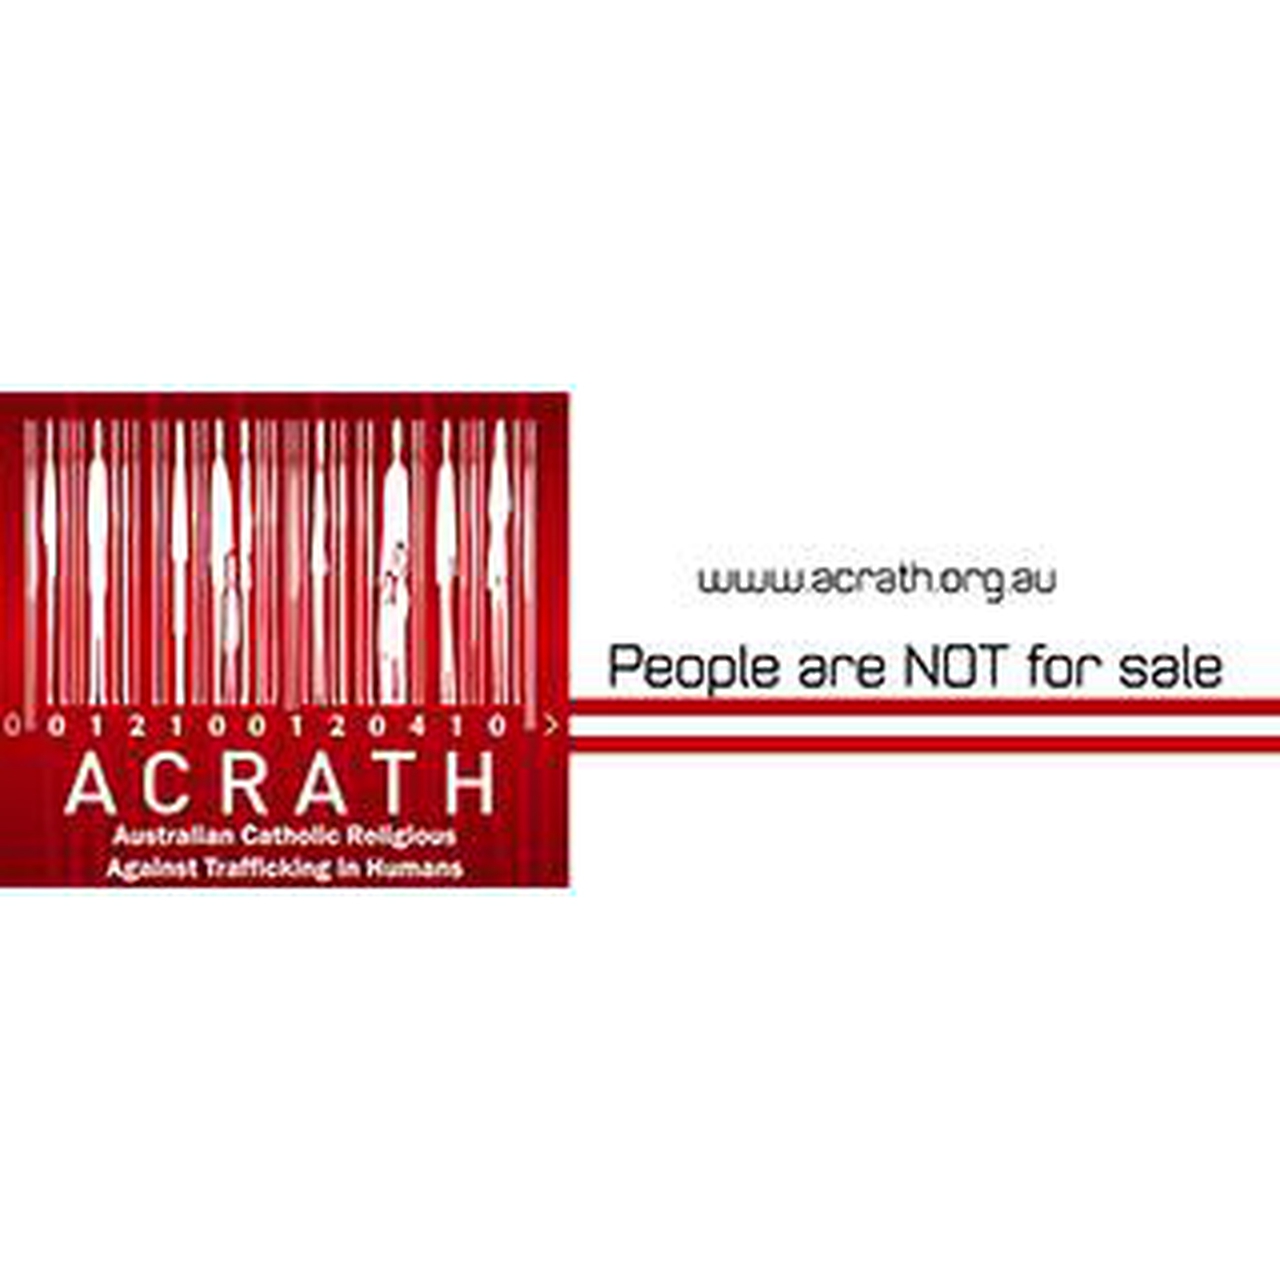 NEWS FROM THE NETWORK: ACRATH